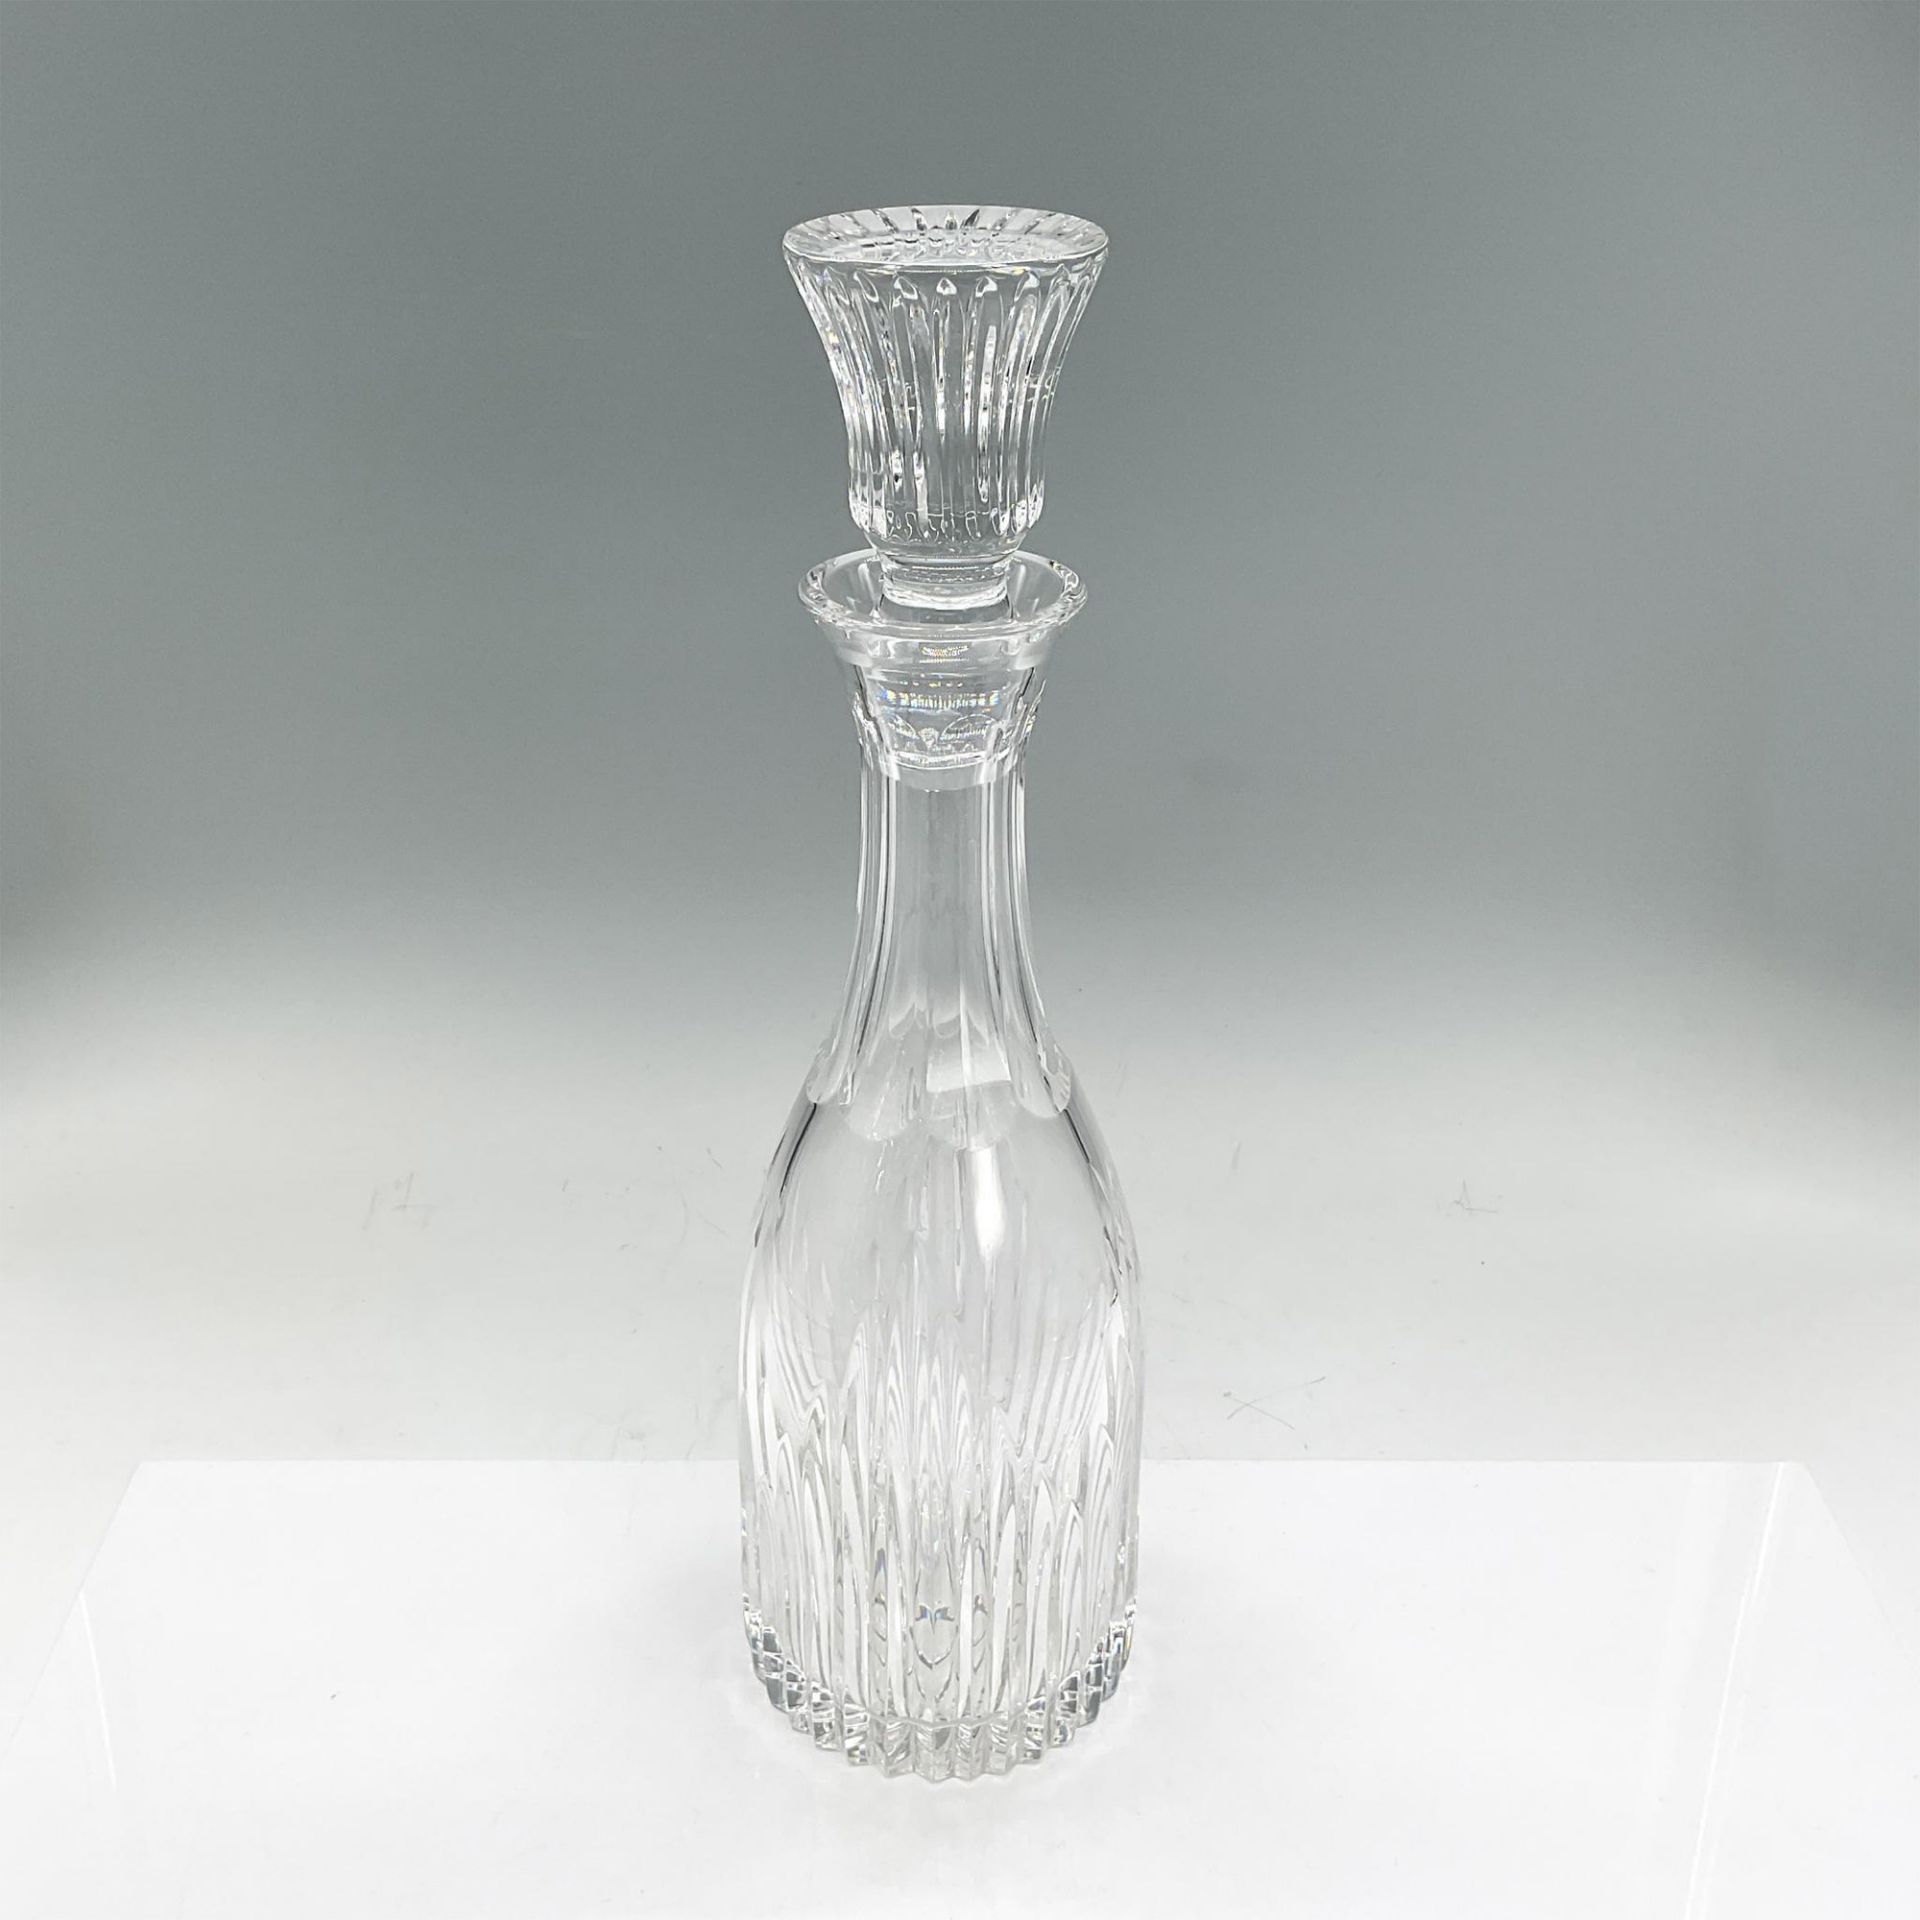 Waterford Crystal Decanter with Stopper, Carina - Image 2 of 3